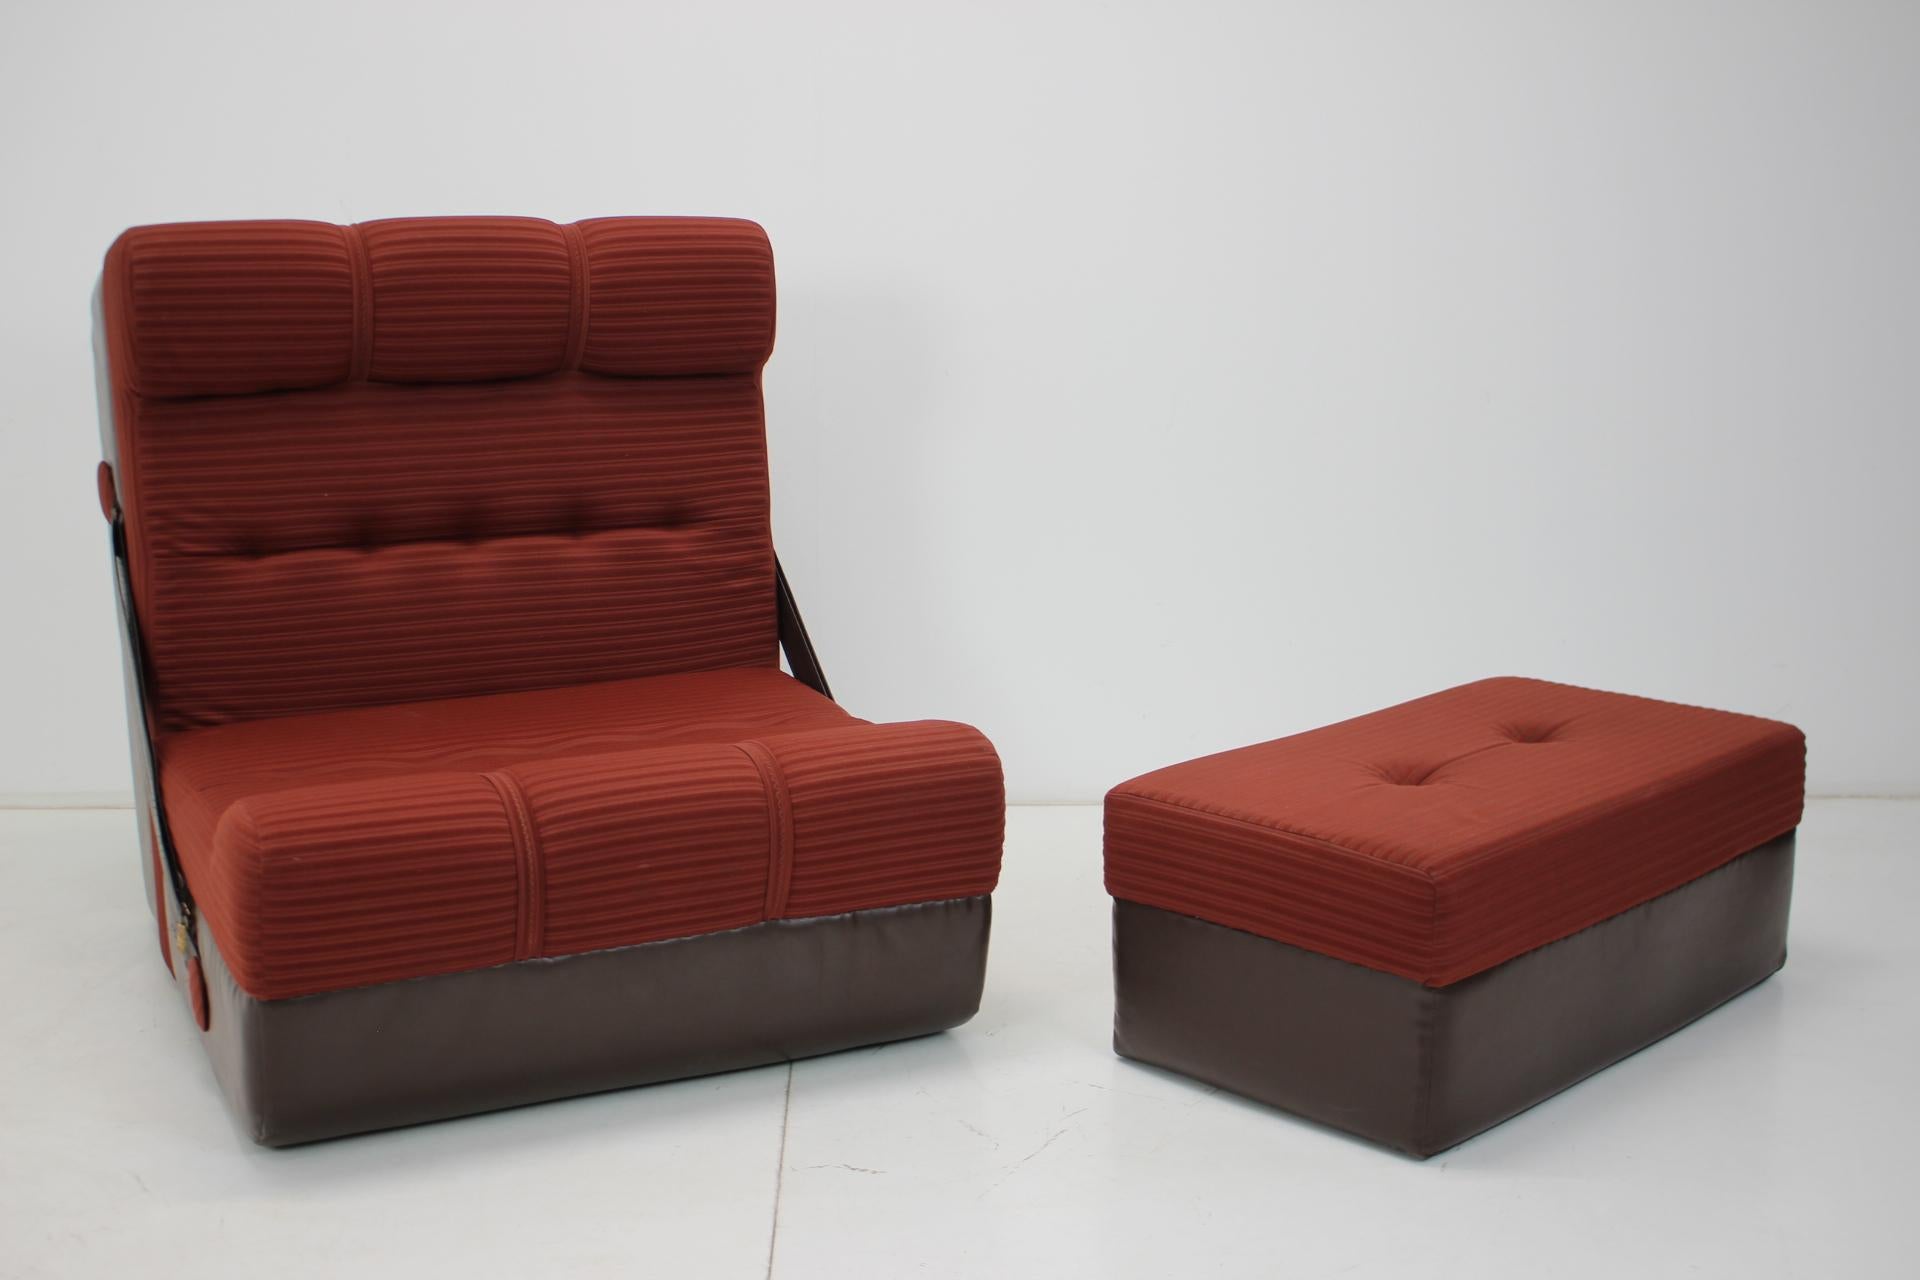 Made in Czechoslovakia
Made of Fabric, Leatherette
Armchair: Height: 91cm, Depth:102cm, Width:84cm, Height seat:37cm
Daybed: Height:37cm, Width:200cm, Depth:84cm
Good original condition.